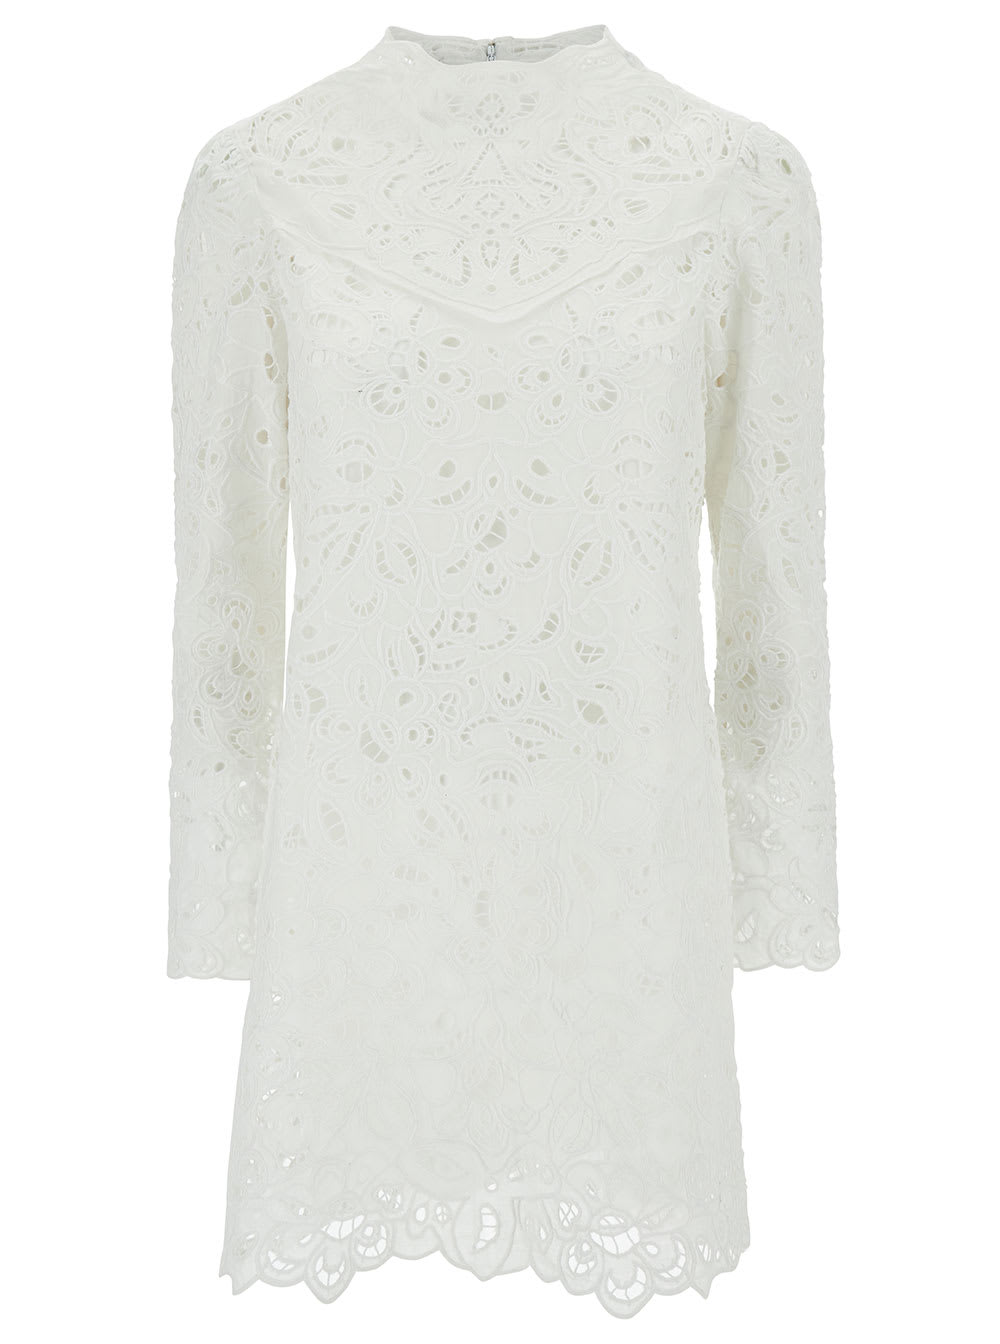 ISABEL MARANT DAPHNE MINI WHITE DRESS WITH FLOWER EMBROIDERY IN GUIPURE WOMAN